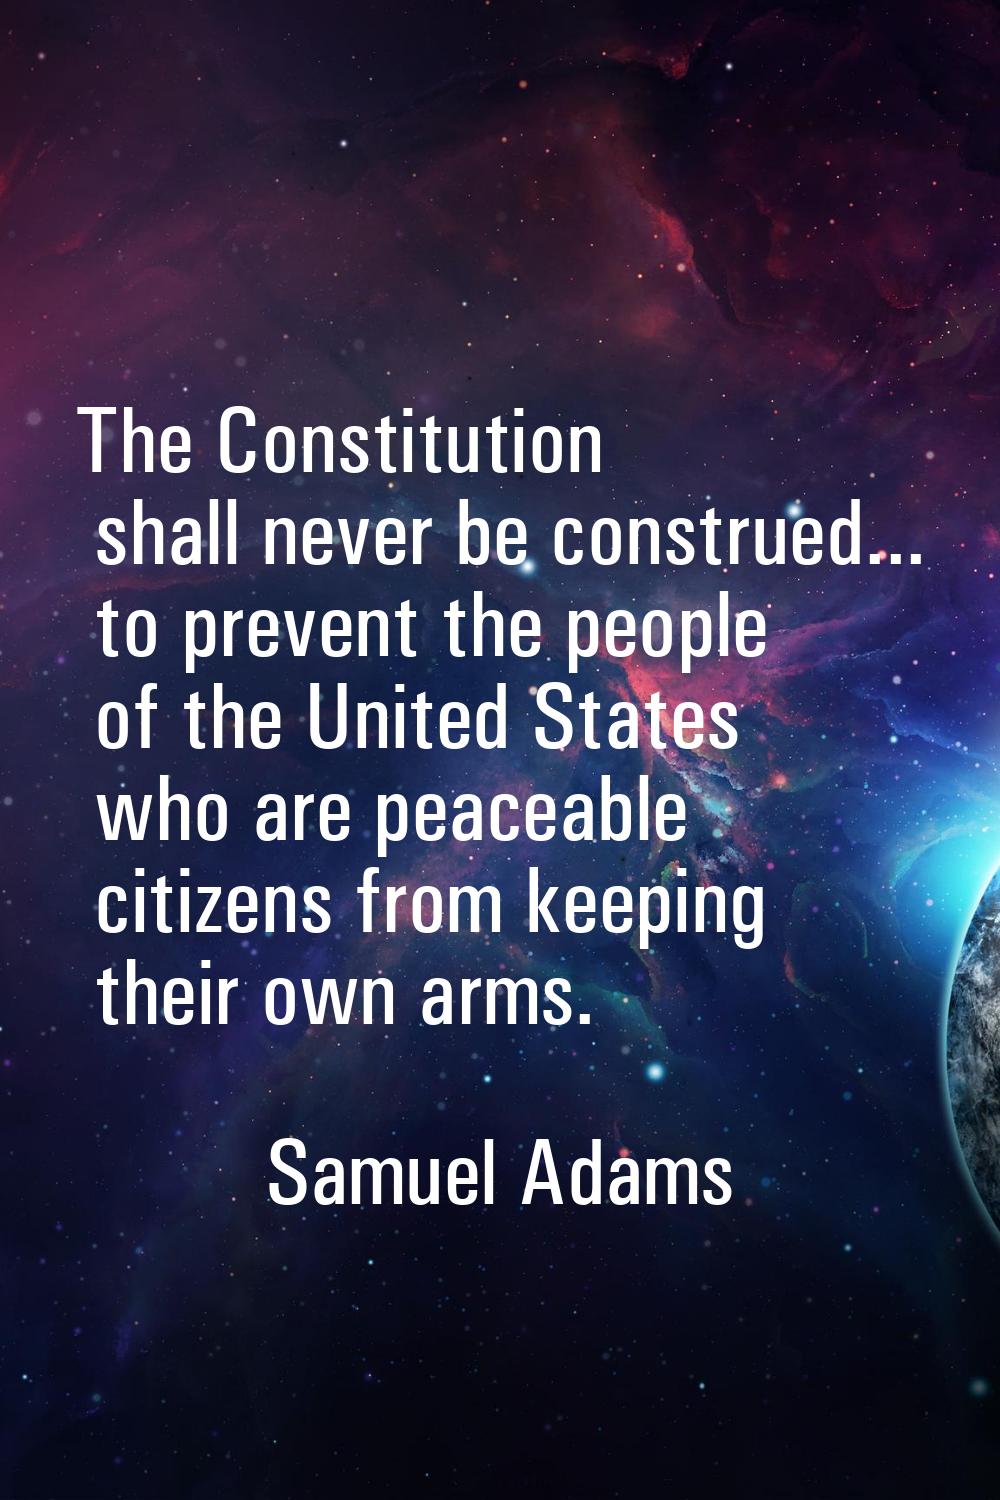 The Constitution shall never be construed... to prevent the people of the United States who are pea